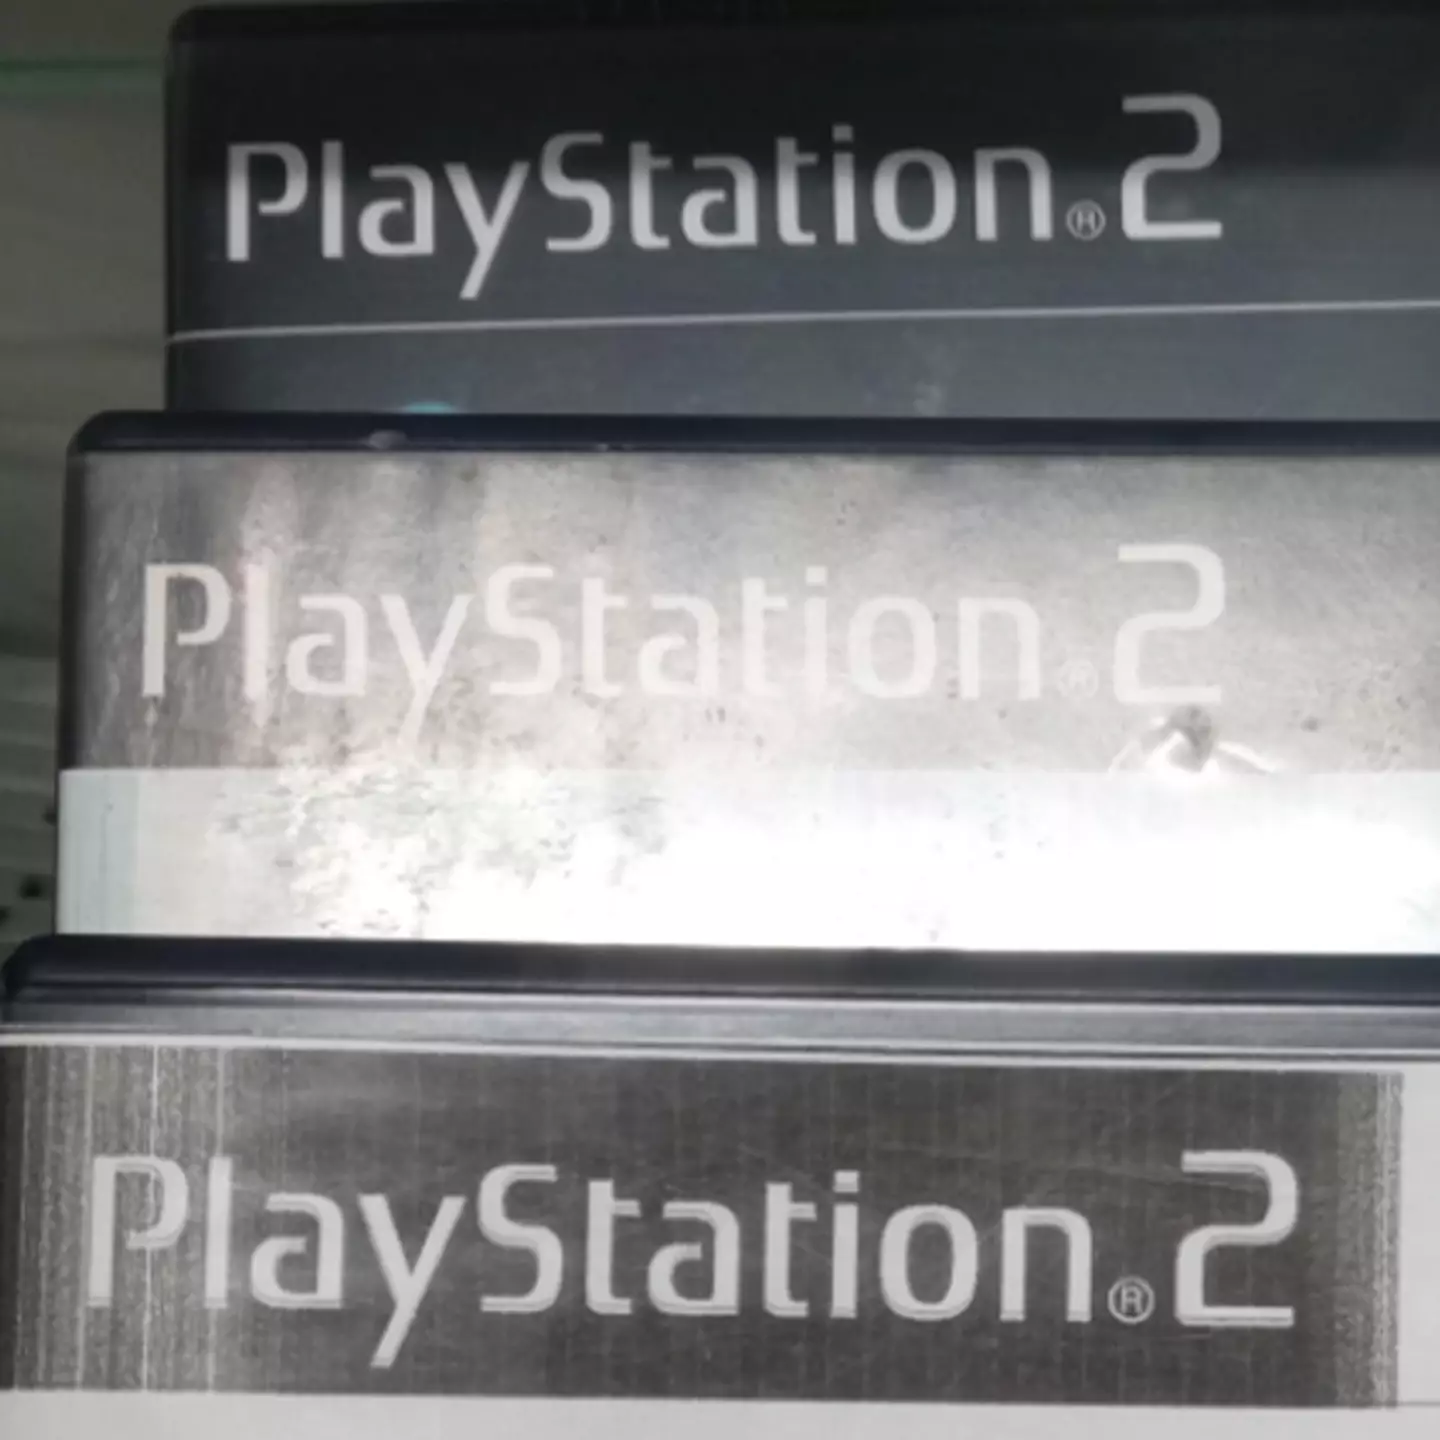 PlayStation fans in utter shock at how much money PS2 game from 2004 is re-selling for